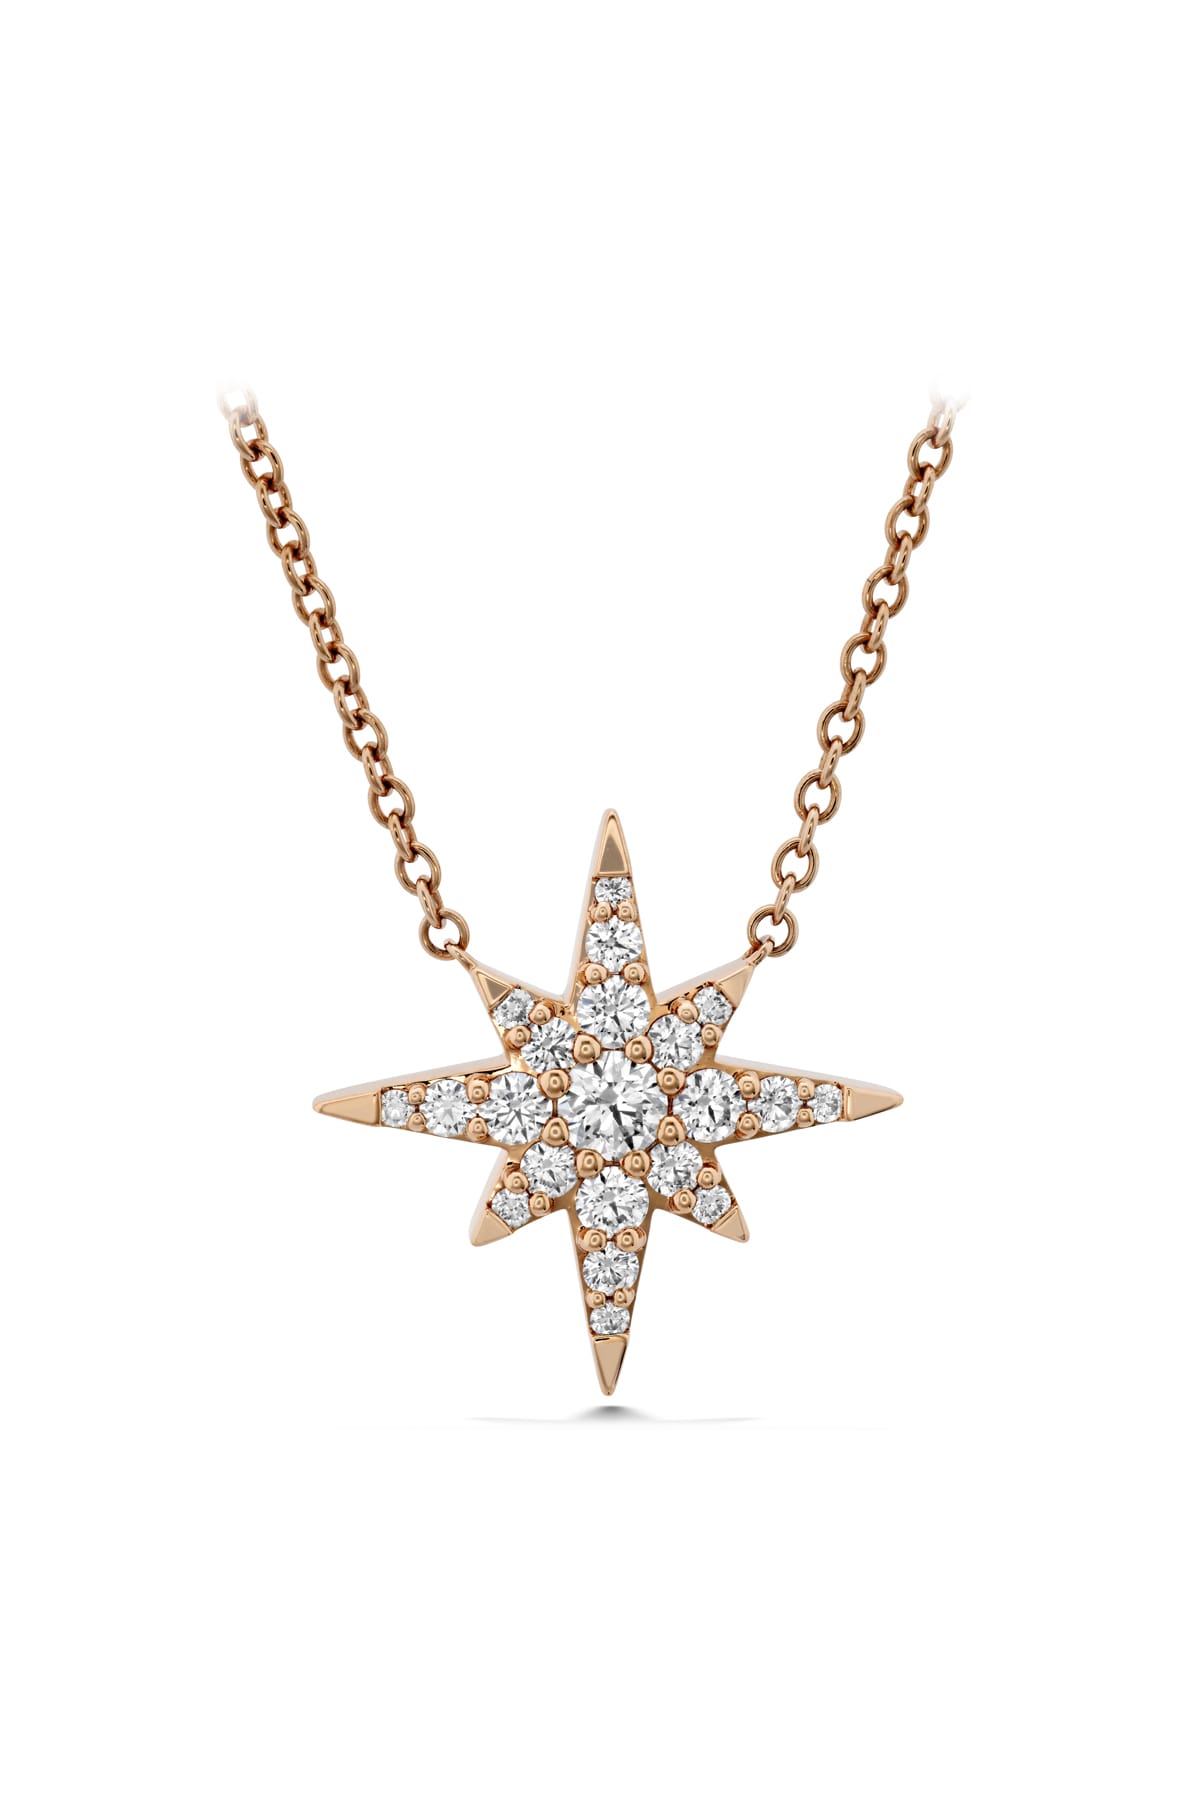 Charmed Starburst Pendant From Hearts On Fire available at LeGassick Diamonds and Jewellery Gold Coast, Australia